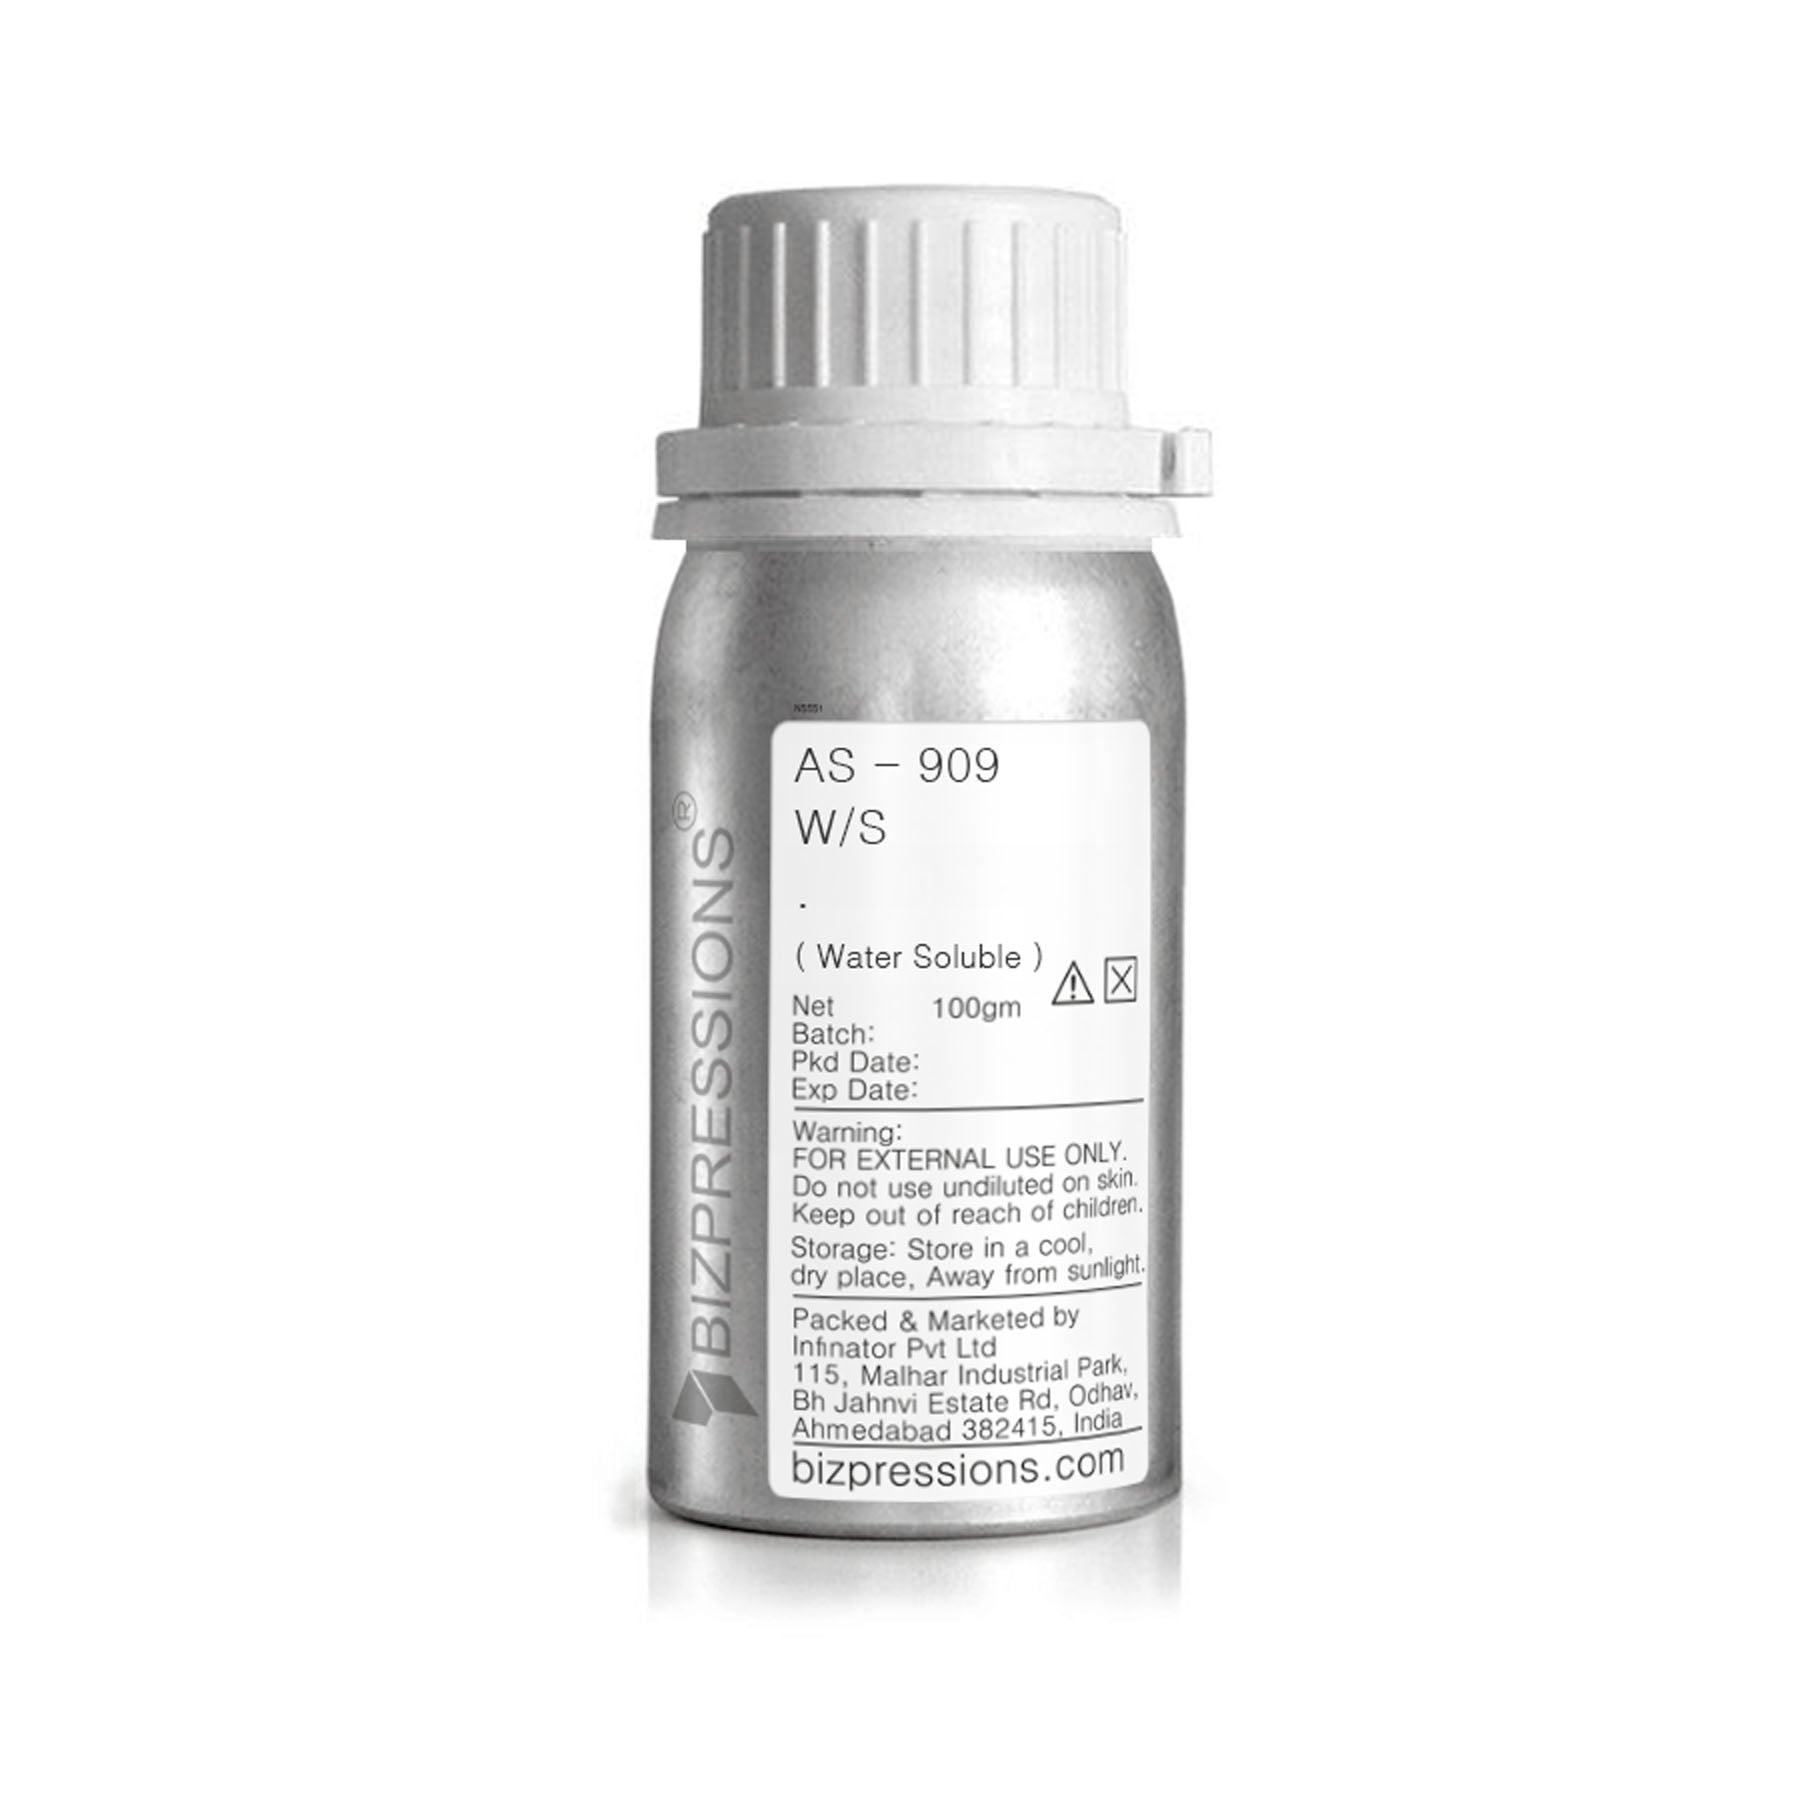 AS - 909 W/S - Fragrance ( Water Soluble ) - 100 gm